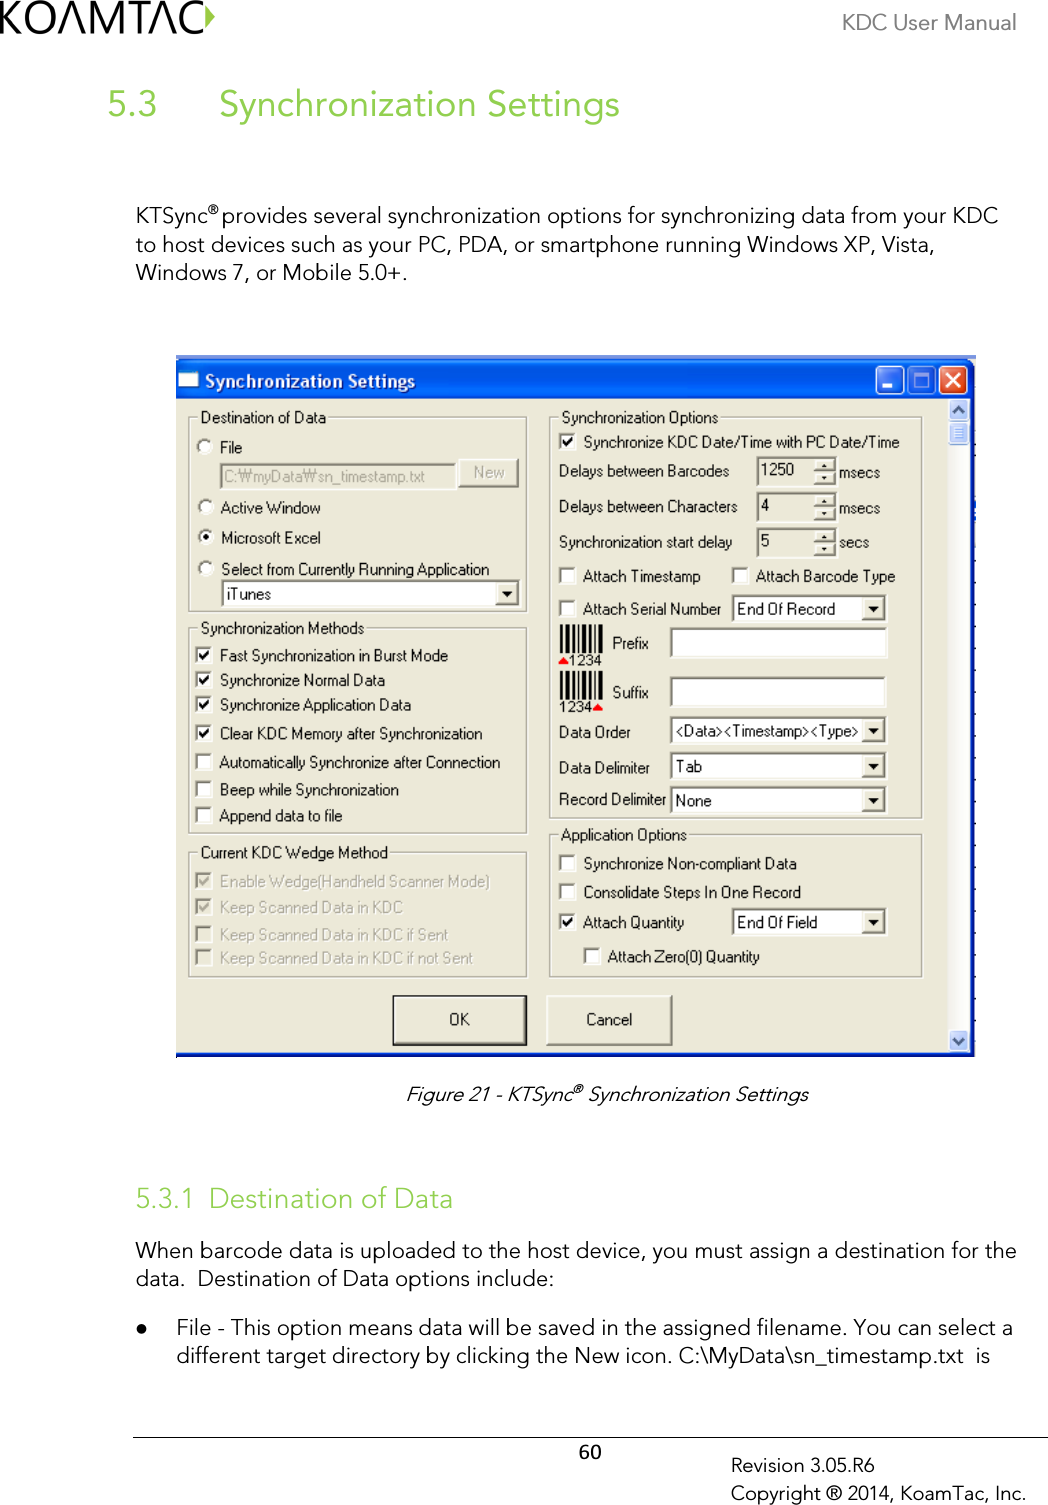 KDC User Manual  60 Revision 3.05.R6 Copyright ® 2014, KoamTac, Inc.   Synchronization Settings 5.3  KTSync® provides several synchronization options for synchronizing data from your KDC to host devices such as your PC, PDA, or smartphone running Windows XP, Vista, Windows 7, or Mobile 5.0+.        5.3.1 Destination of Data When barcode data is uploaded to the host device, you must assign a destination for the data.  Destination of Data options include:  File - This option means data will be saved in the assigned filename. You can select a different target directory by clicking the New icon. C:\MyData\sn_timestamp.txt  is Figure 21 - KTSync® Synchronization Settings 